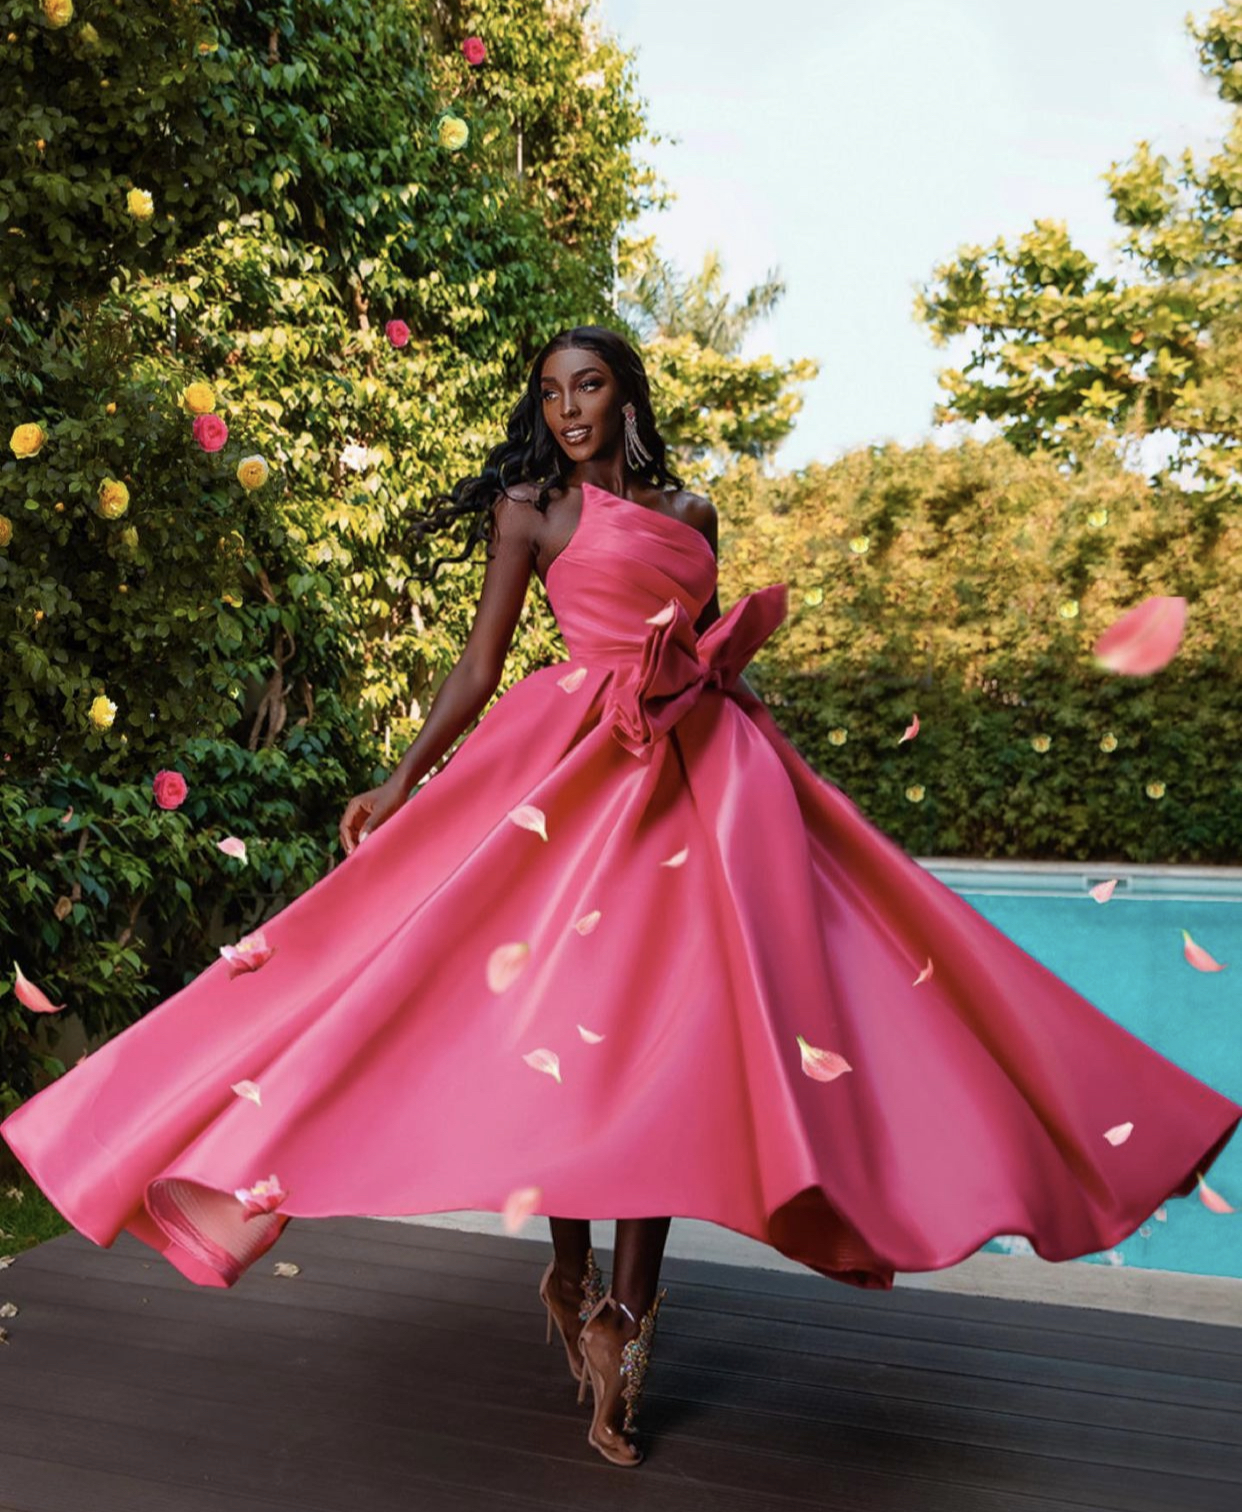 Take a look at 18 stunning photos of Olivia Yace, The Miss World 2nd Runner Up From Cote D' Ivoire.